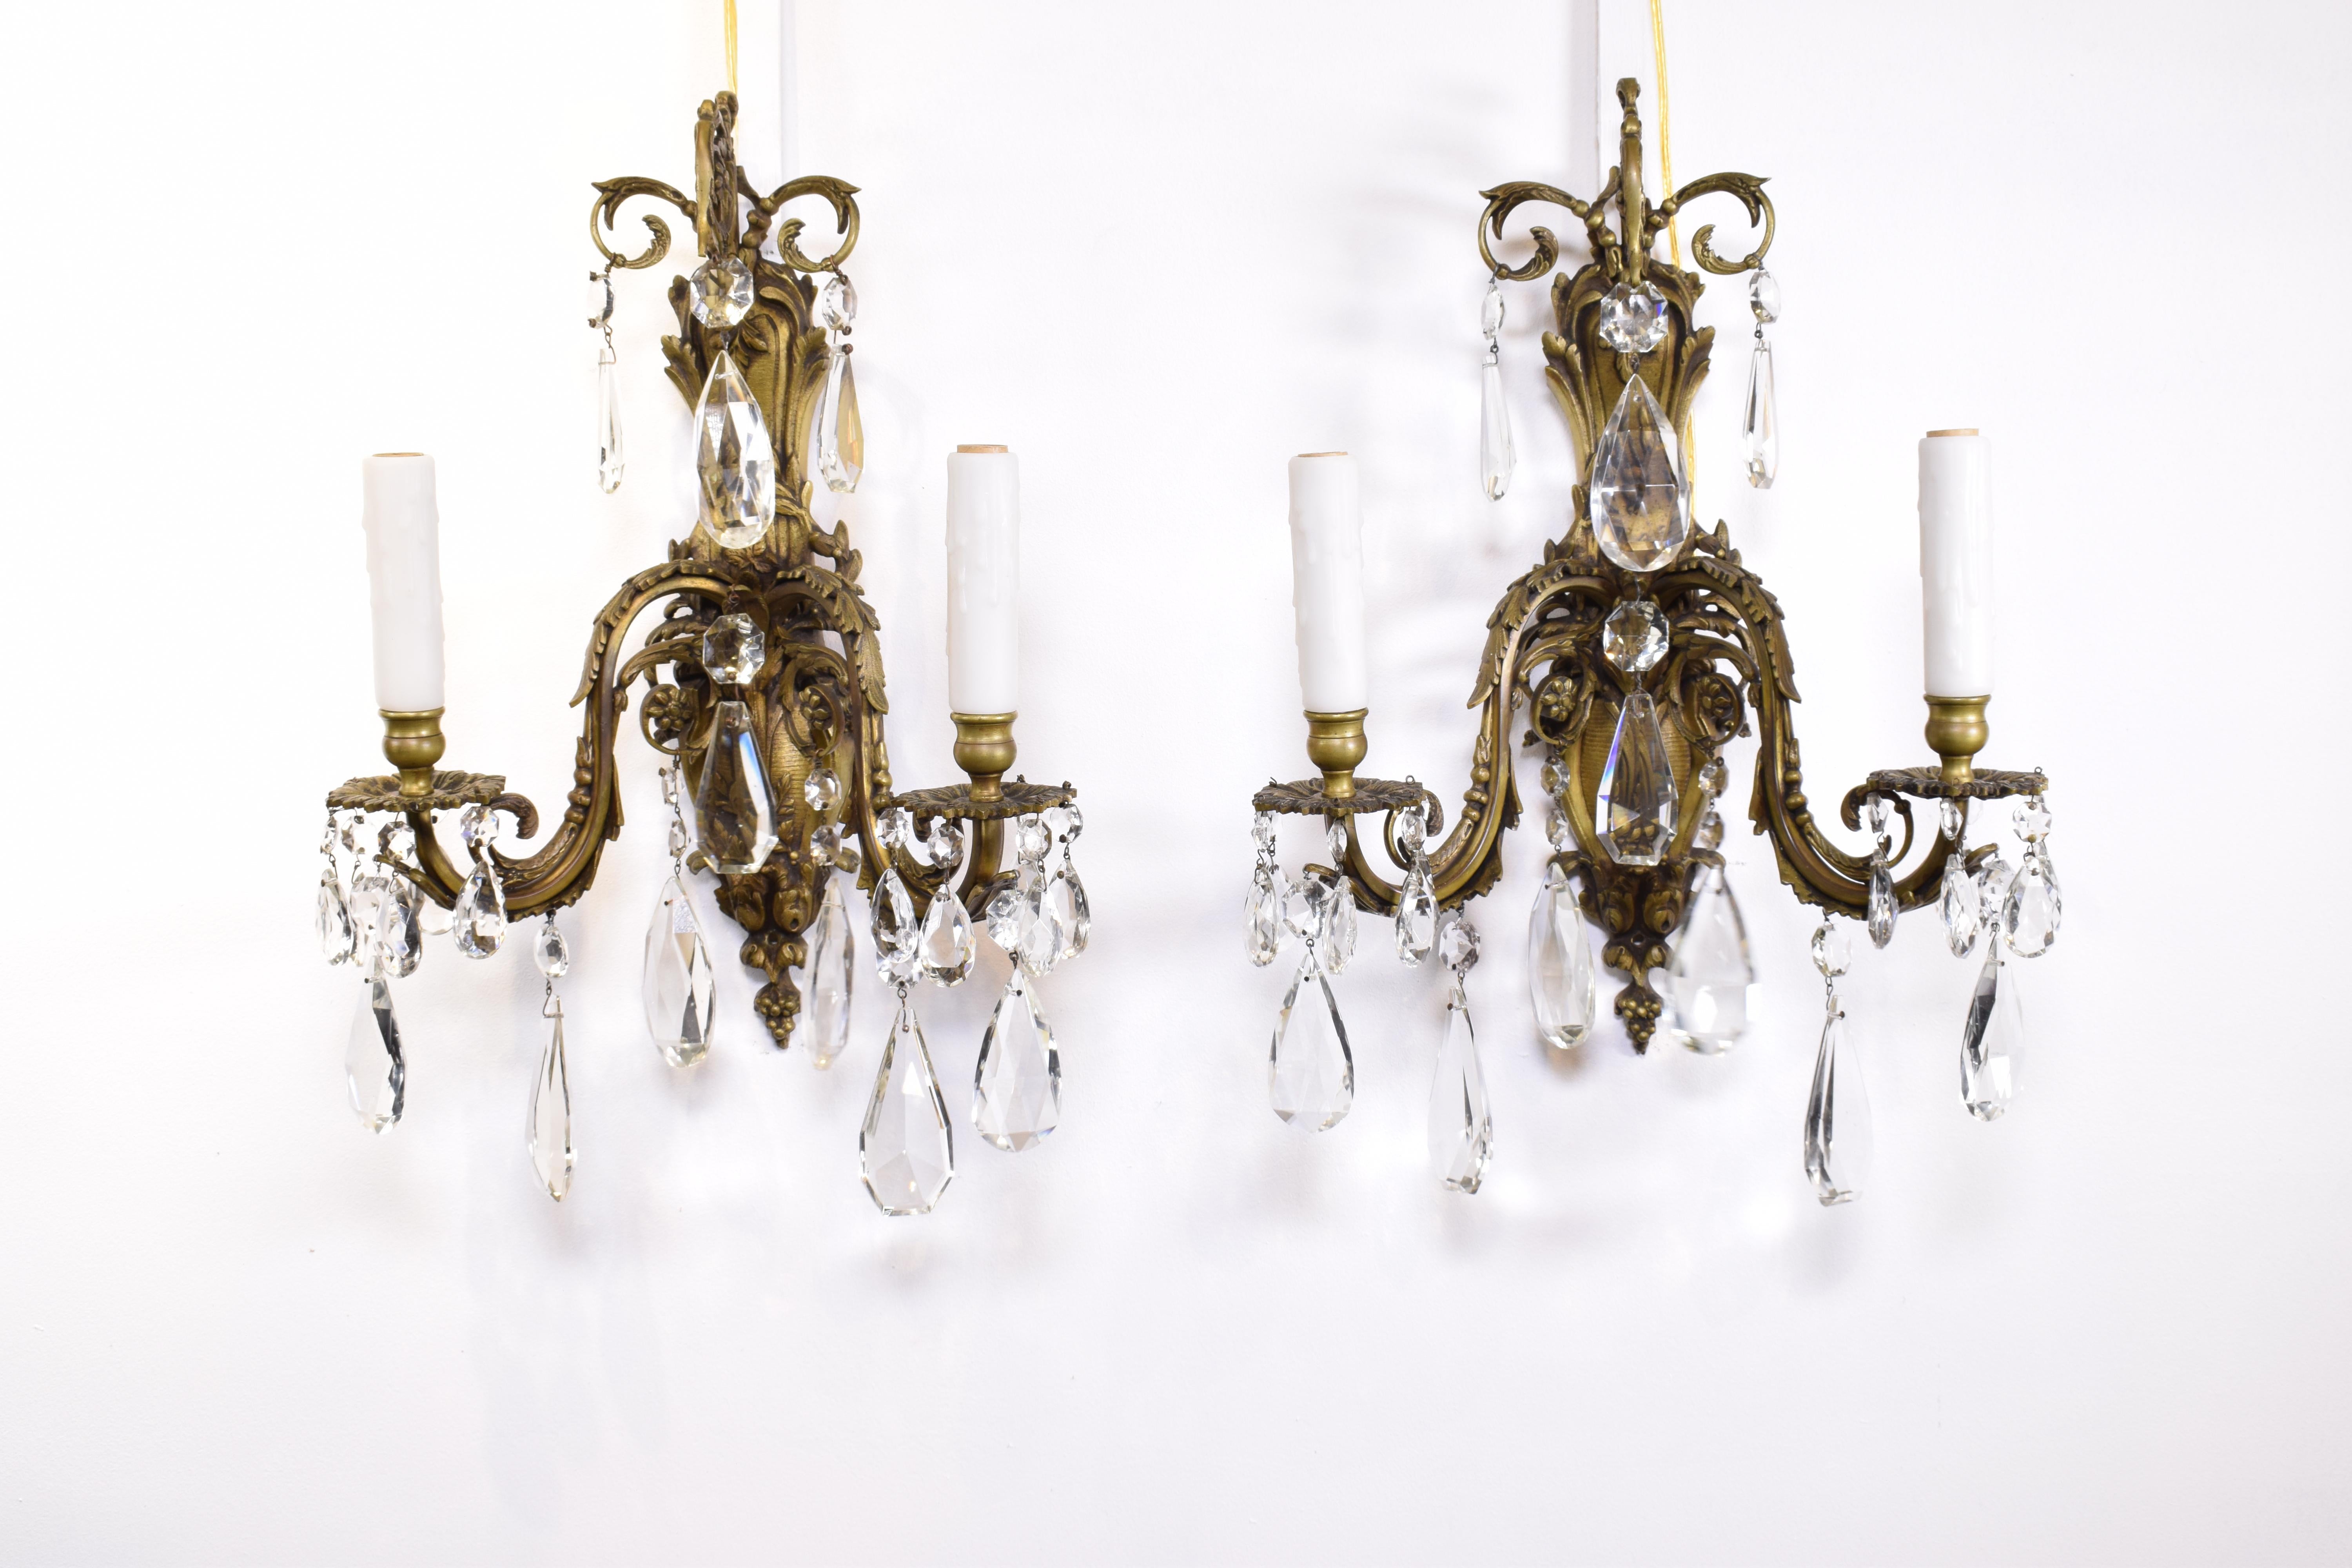 A Fine Pair of Gilt Bronze & Crystal Wall Sconces. 2 lights each. France, circa 1930
Dimensions: Height  18